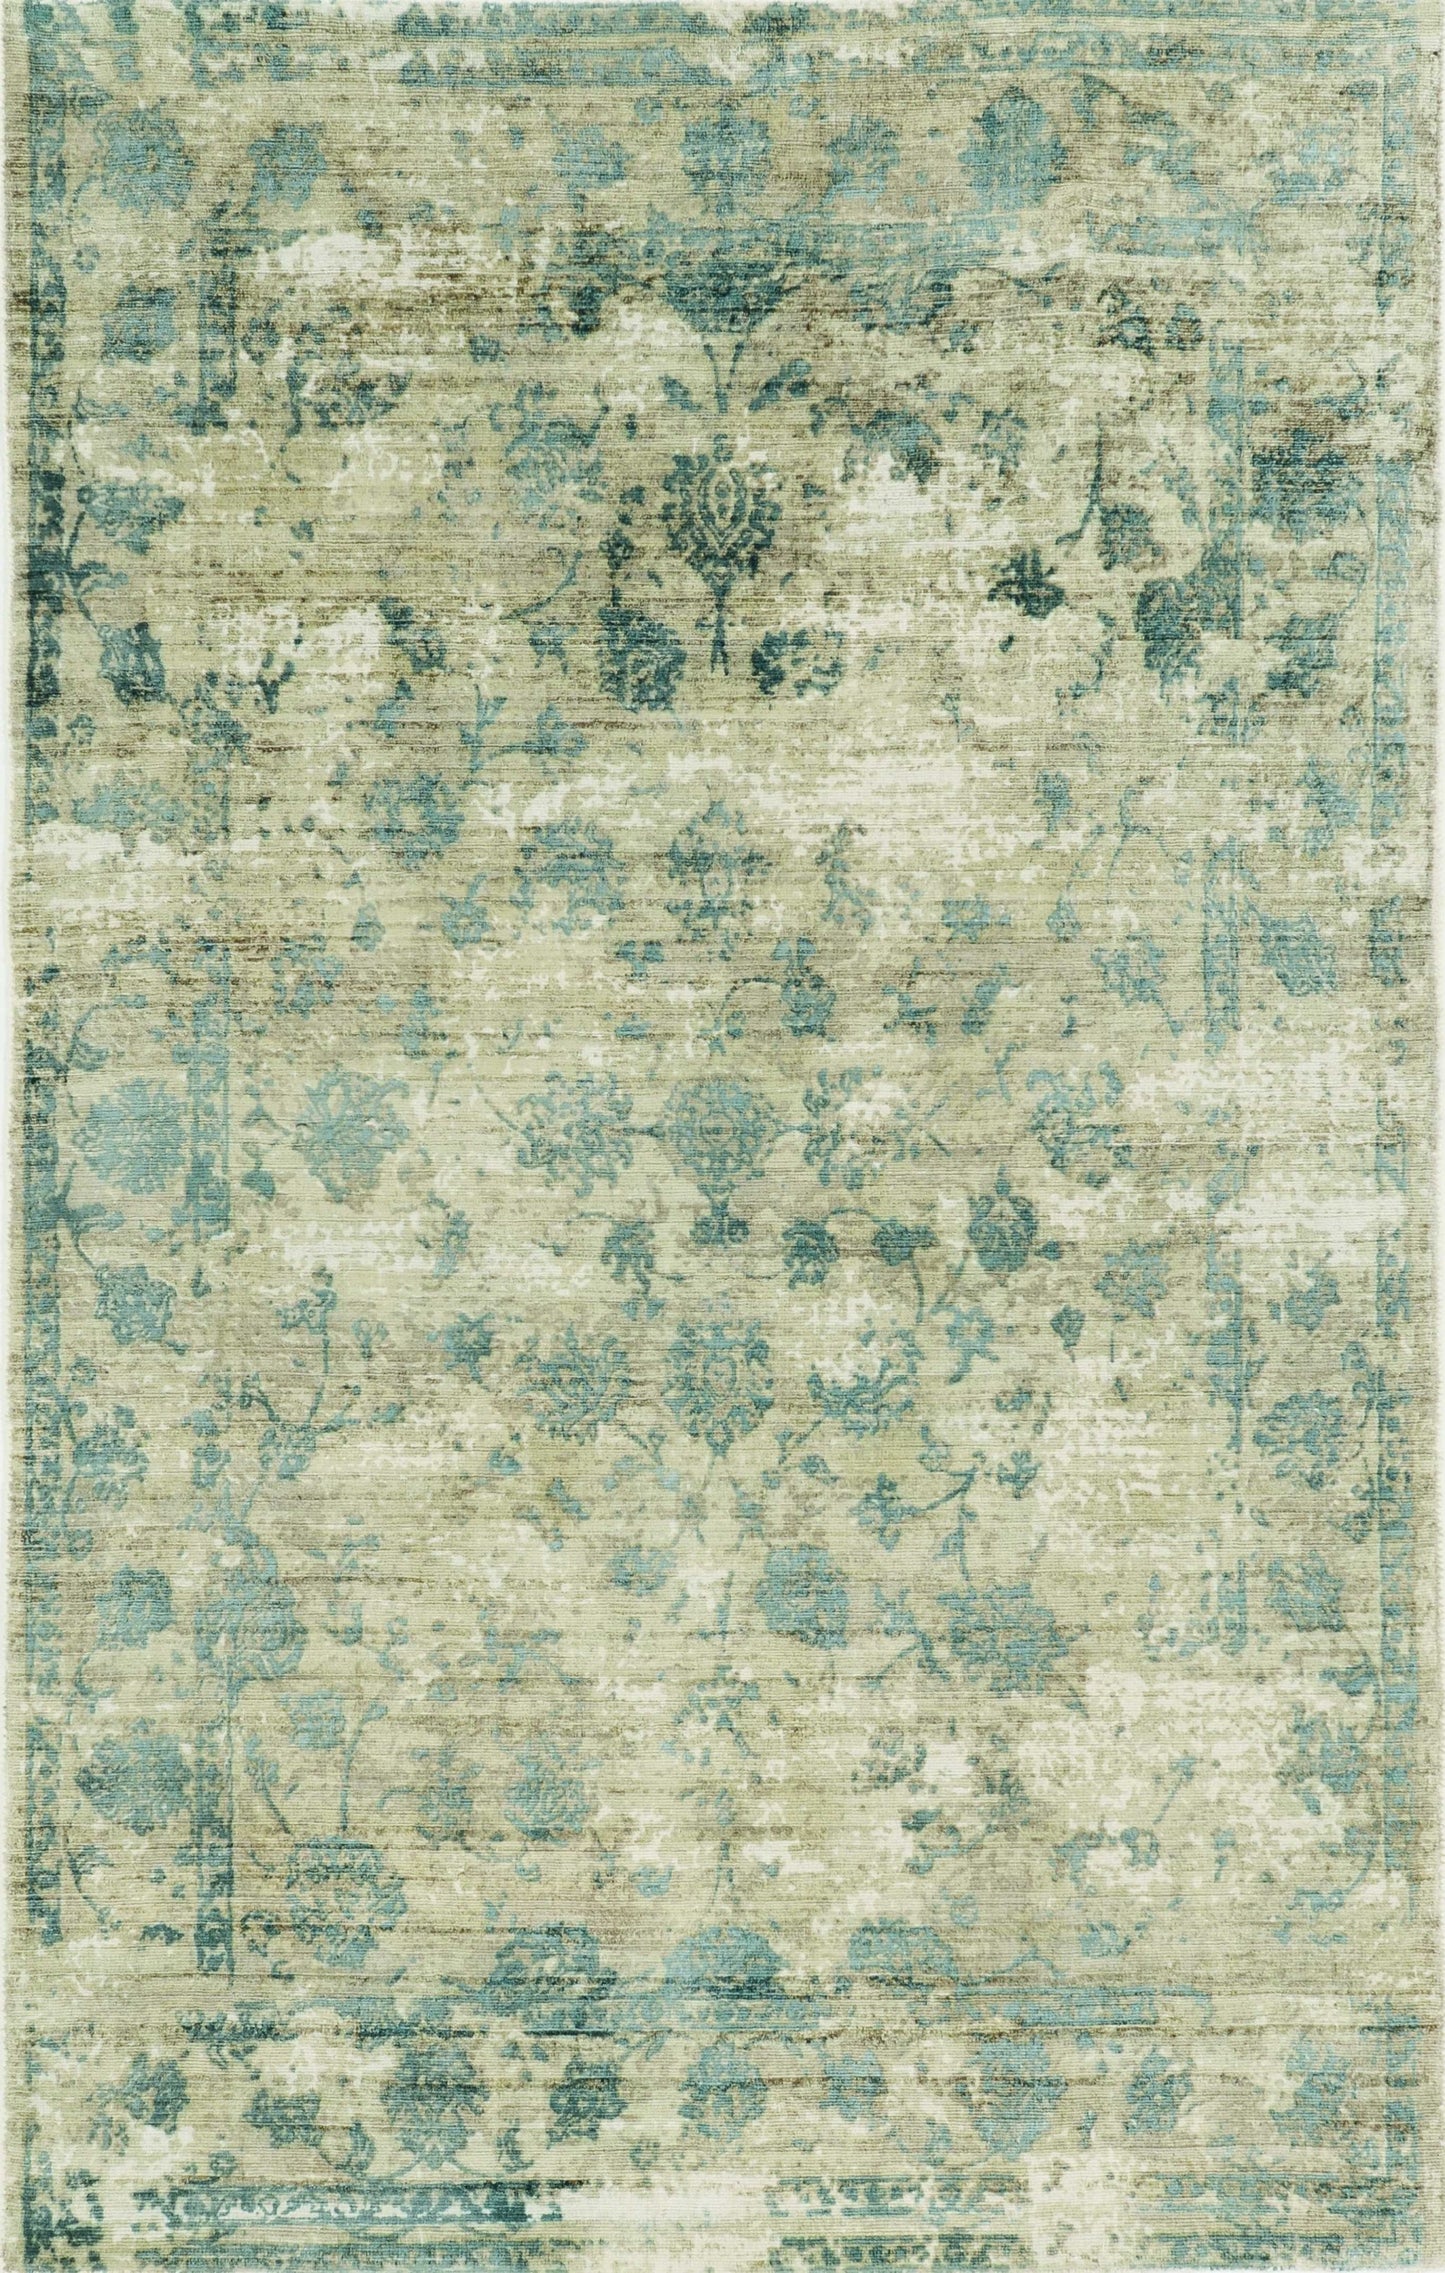 3' X 5' Beige and Blue Floral Area Rug